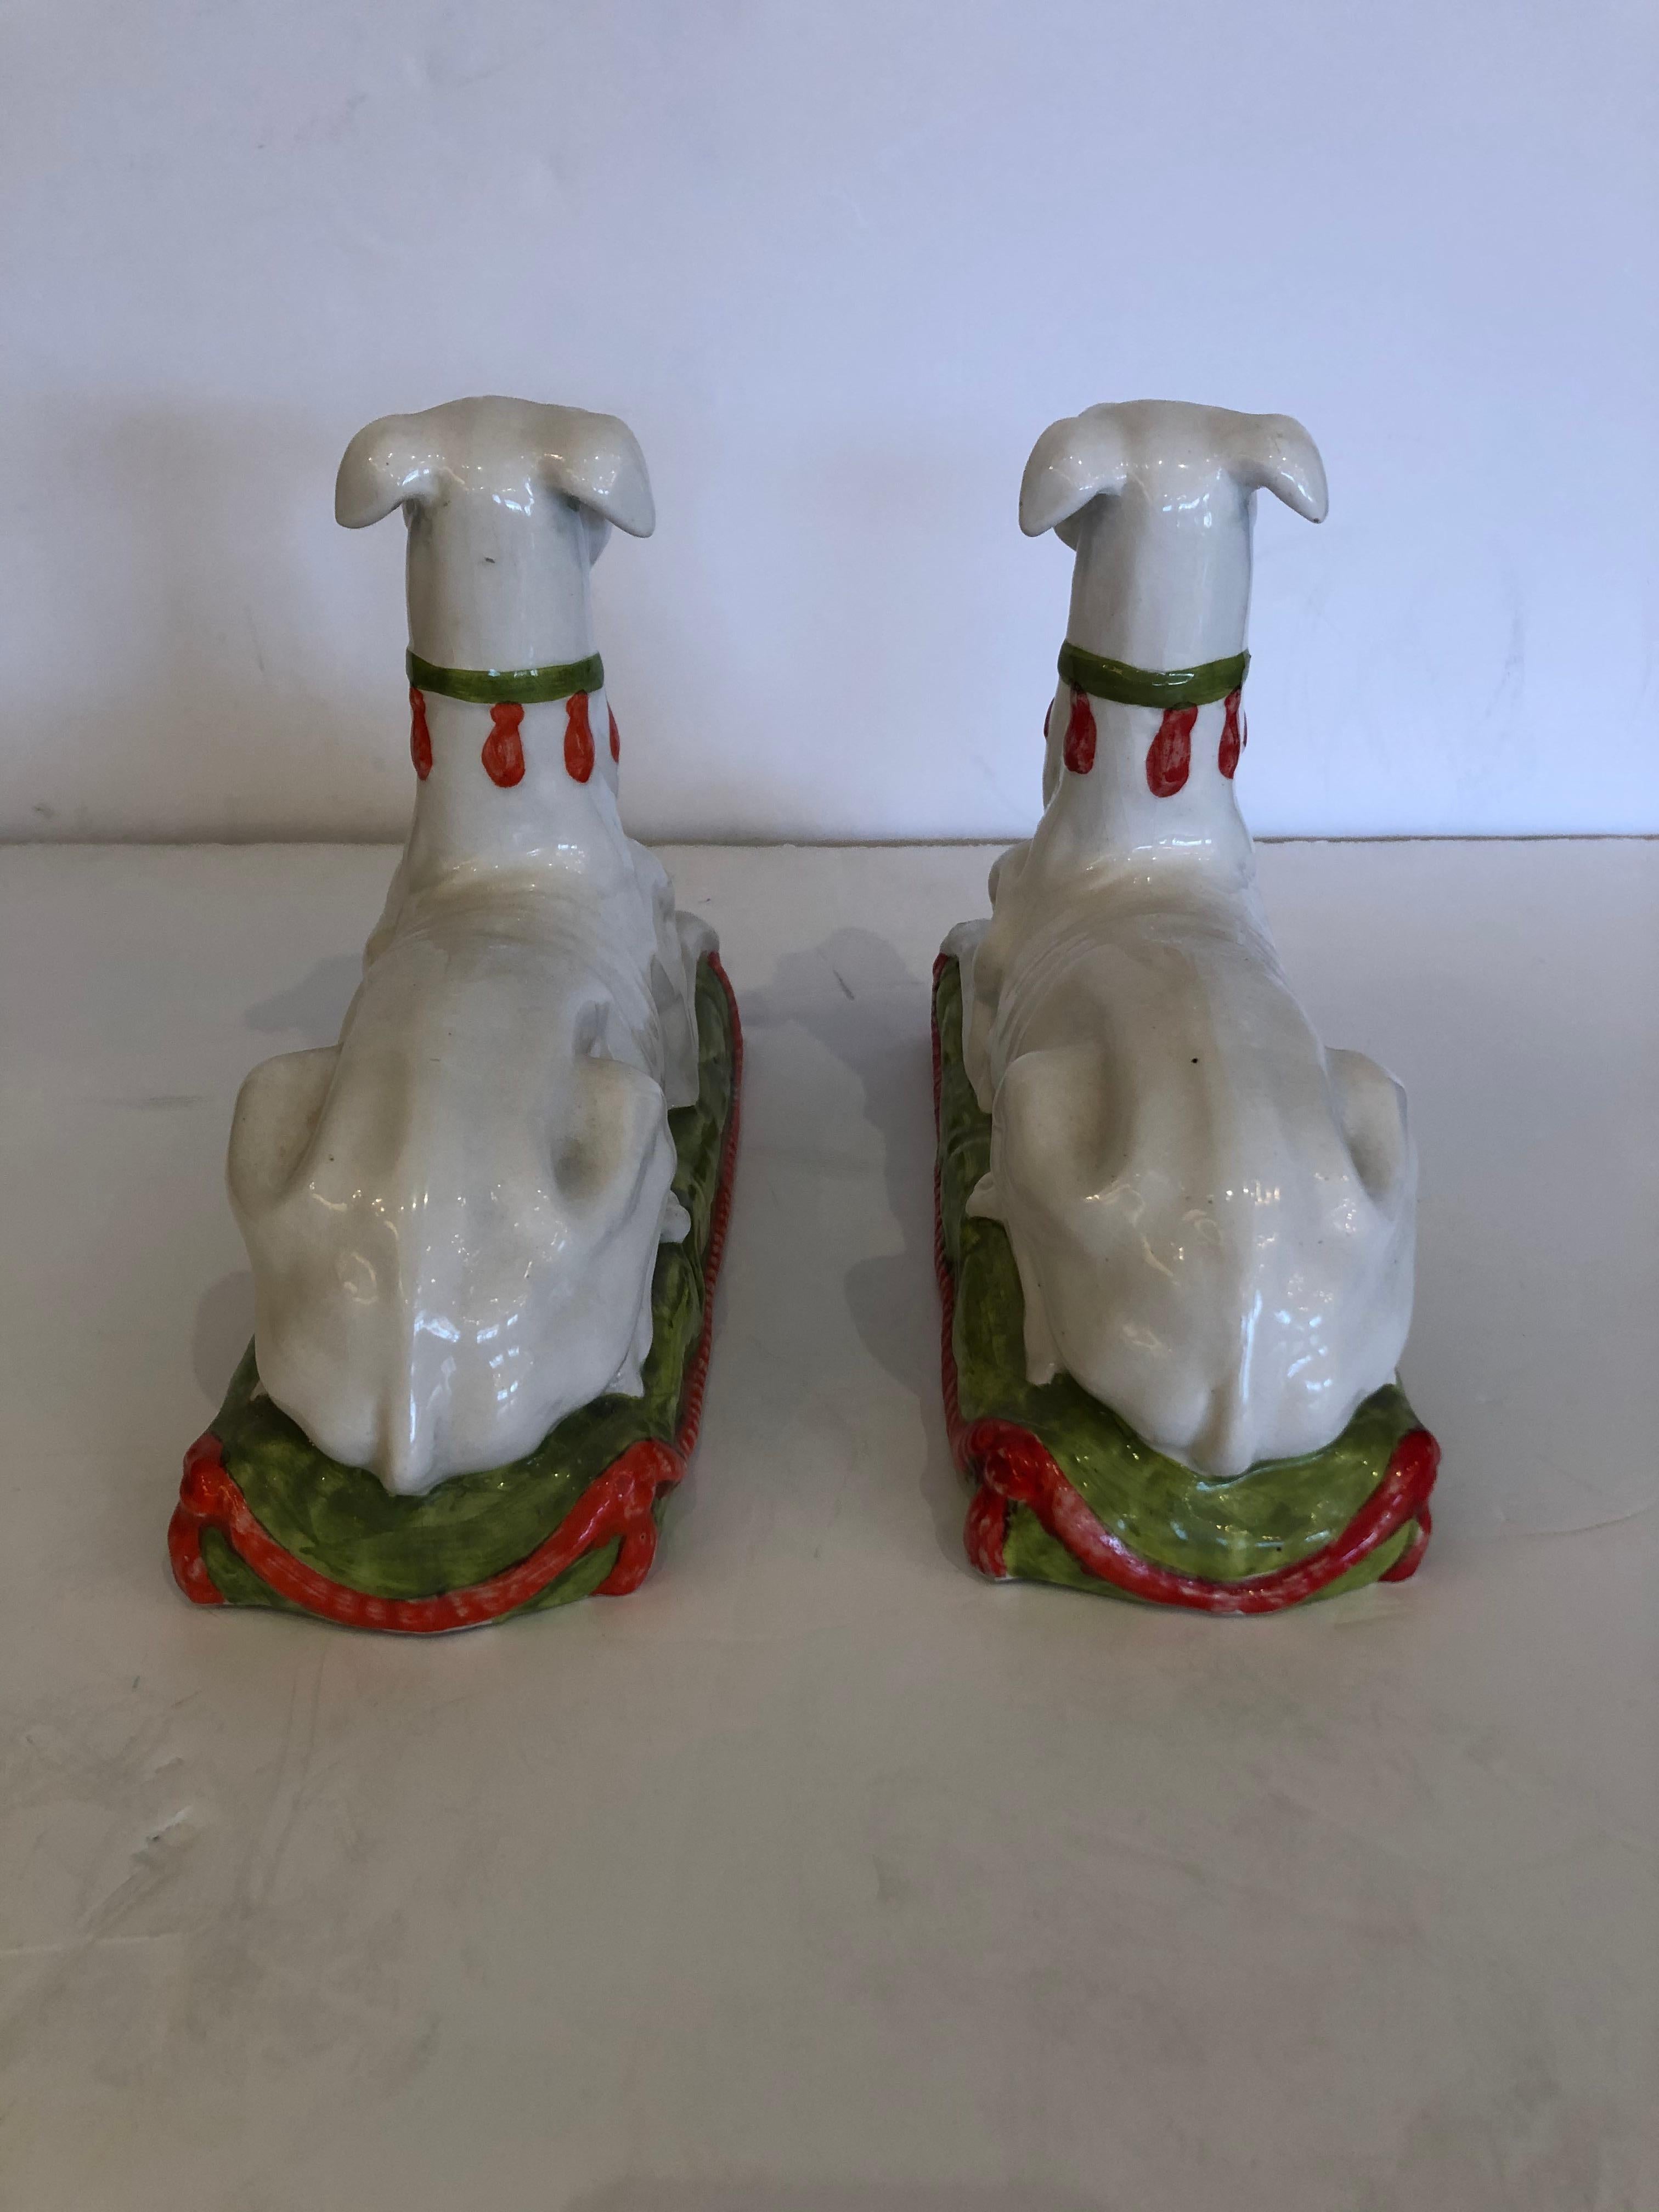 Striking Unusual Pair of Italian Ceramic Recument Whippets Greyhounds Sculptures For Sale 3